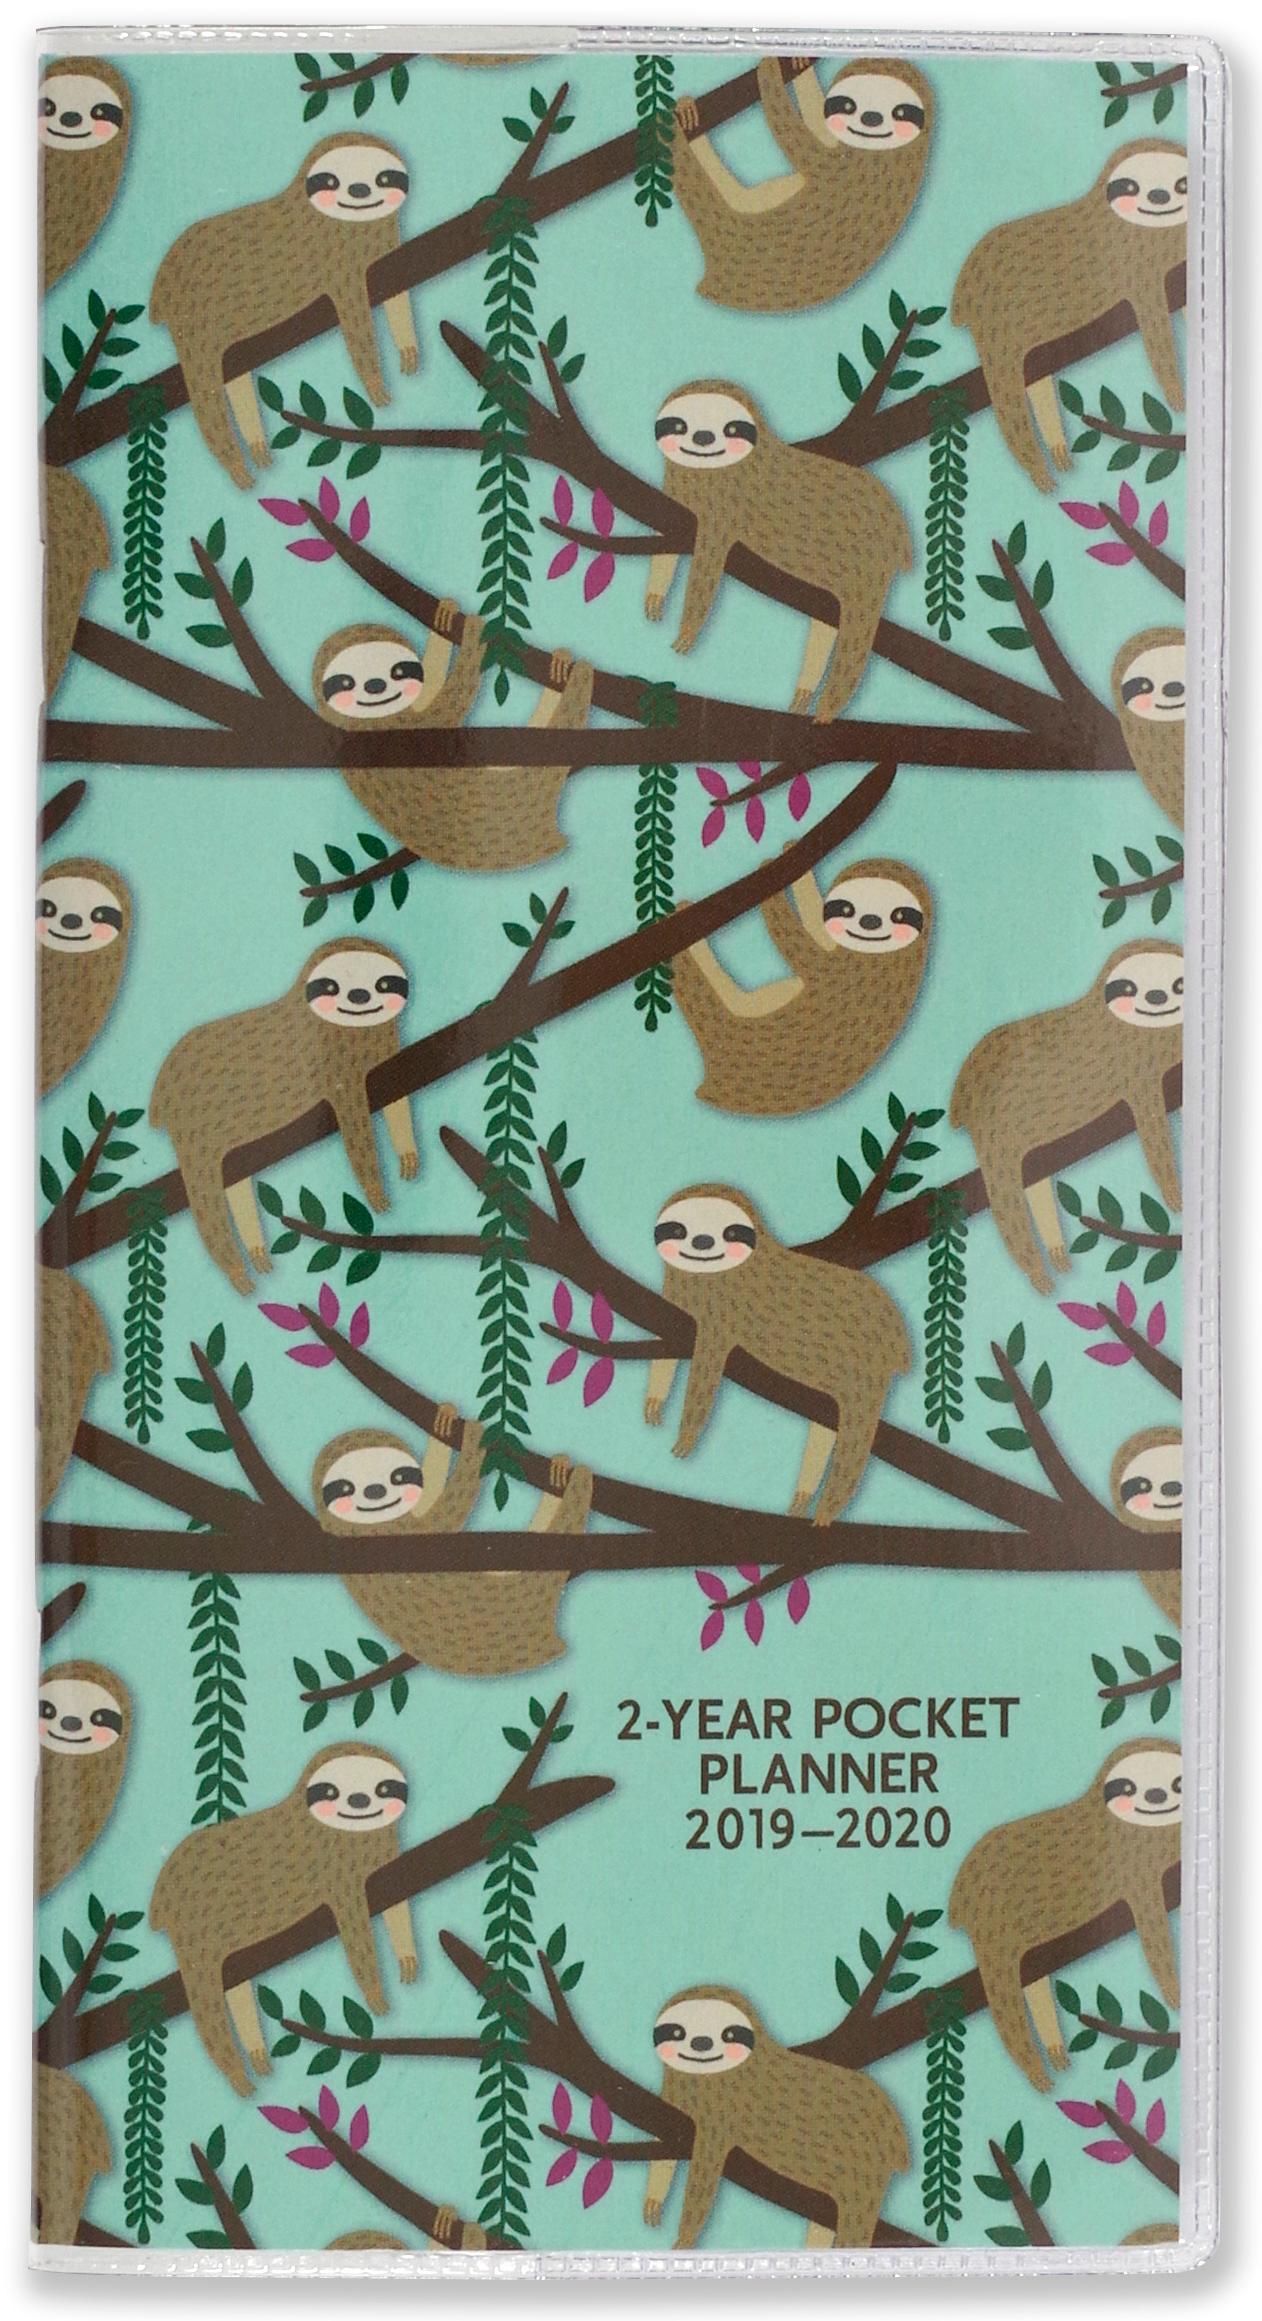 2019-2020 2-YEAR POCKET PLANNER MONTHLY, SLOTHS